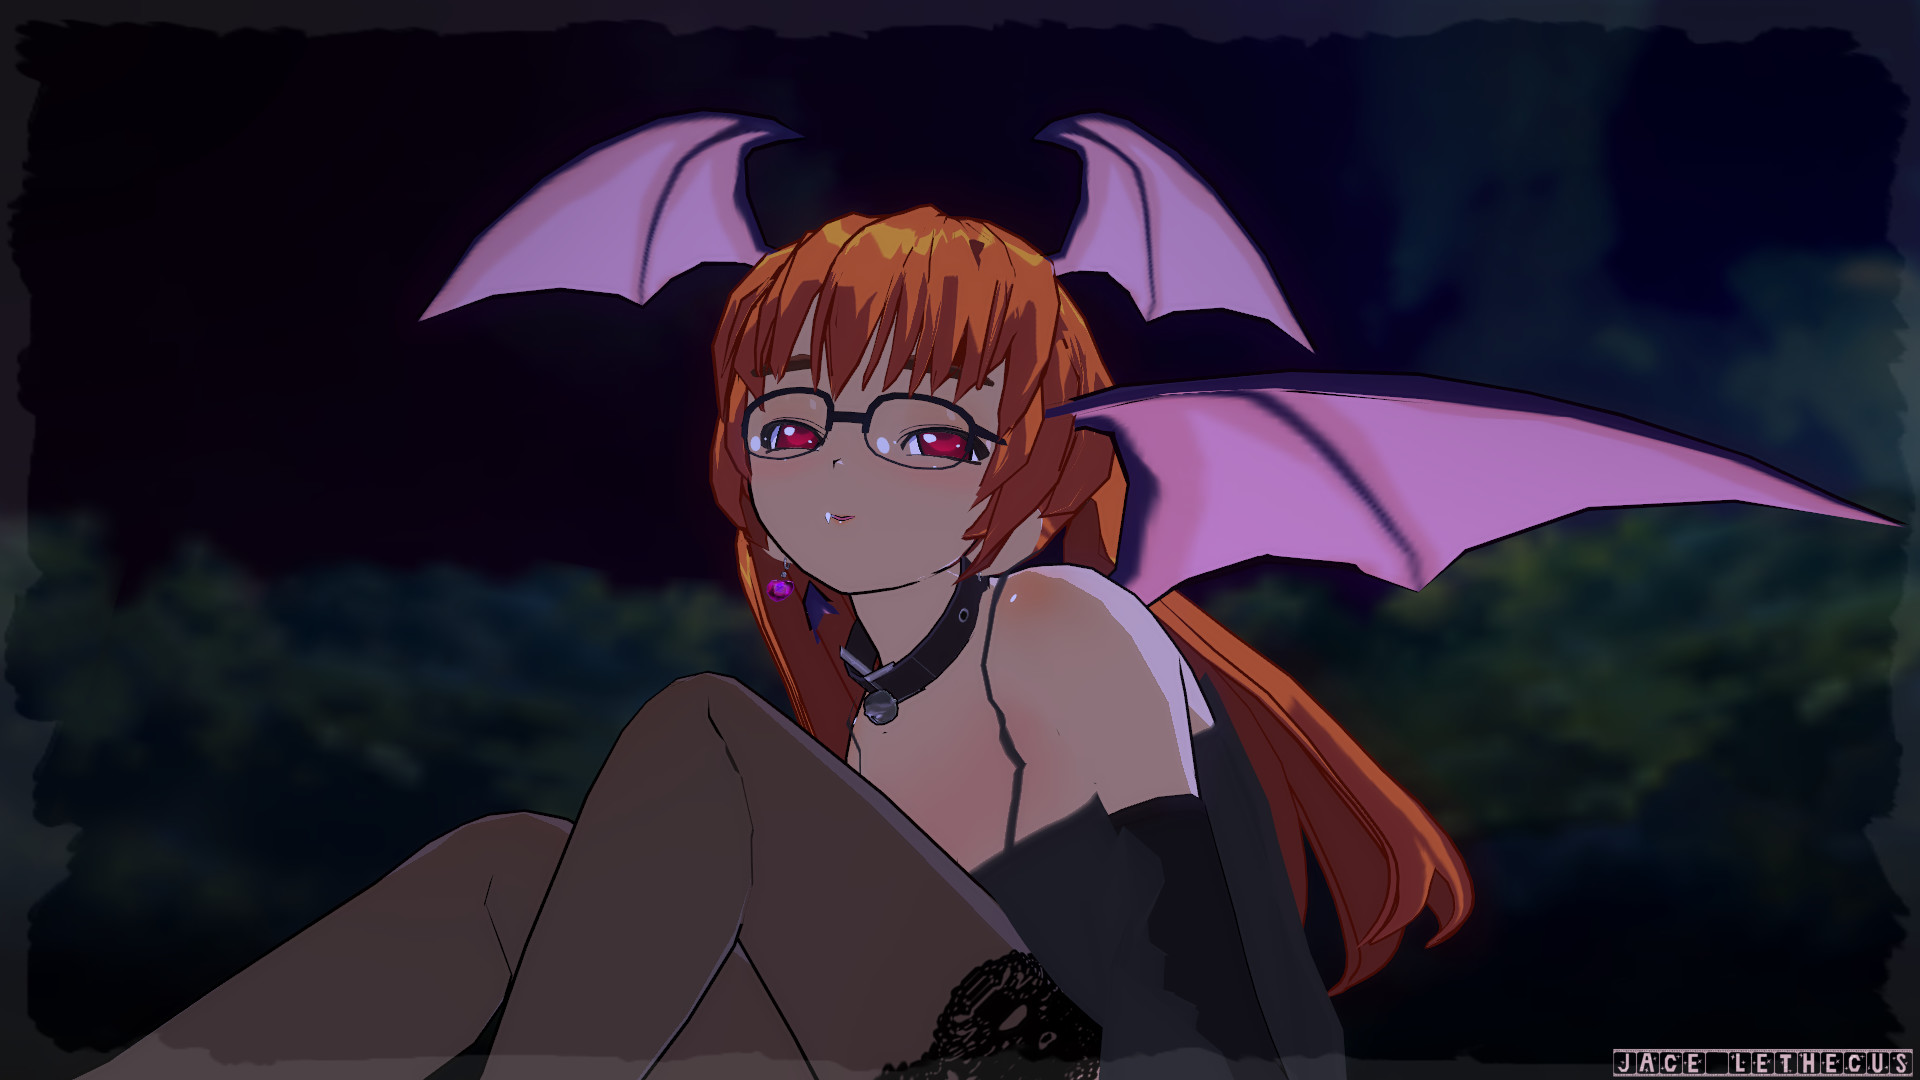 1920x1080 ... Anime Succubus Outside at Night - Custom Girl by Jace-Lethecus